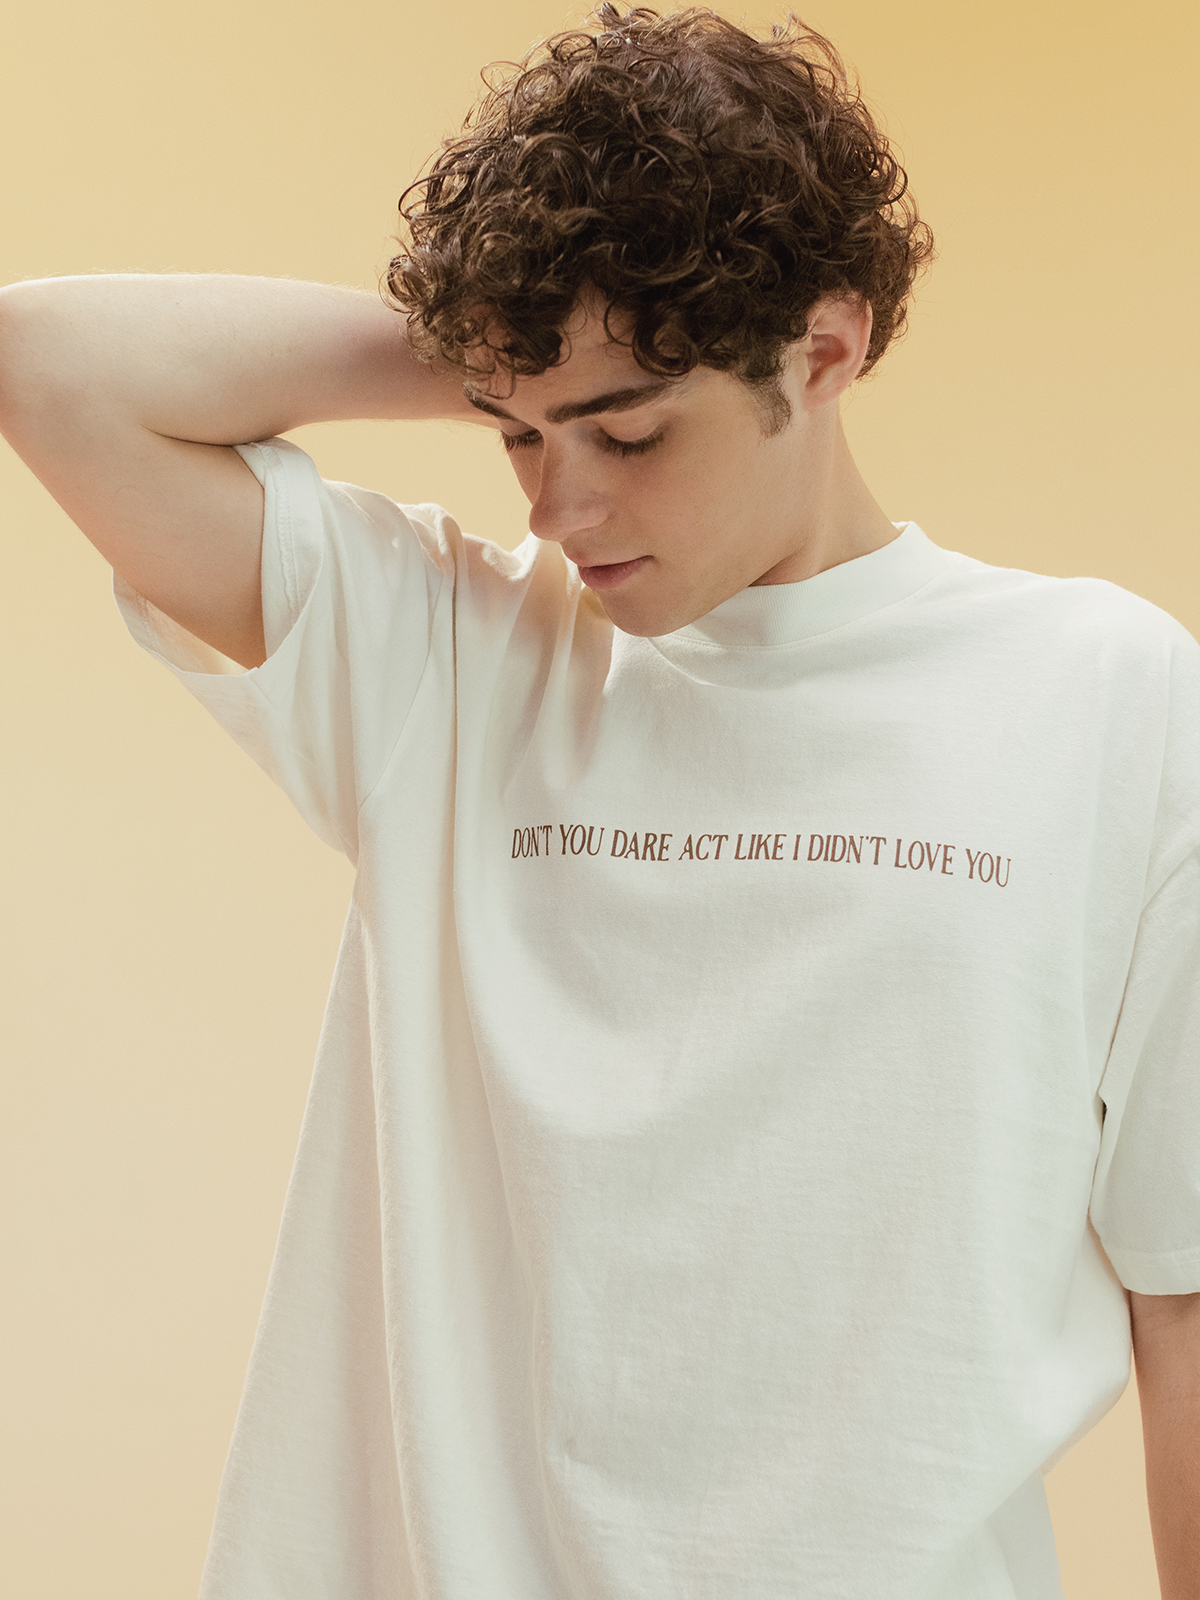 Don't you dare act like I didn't love you crisis tee front on Joshua Bassett